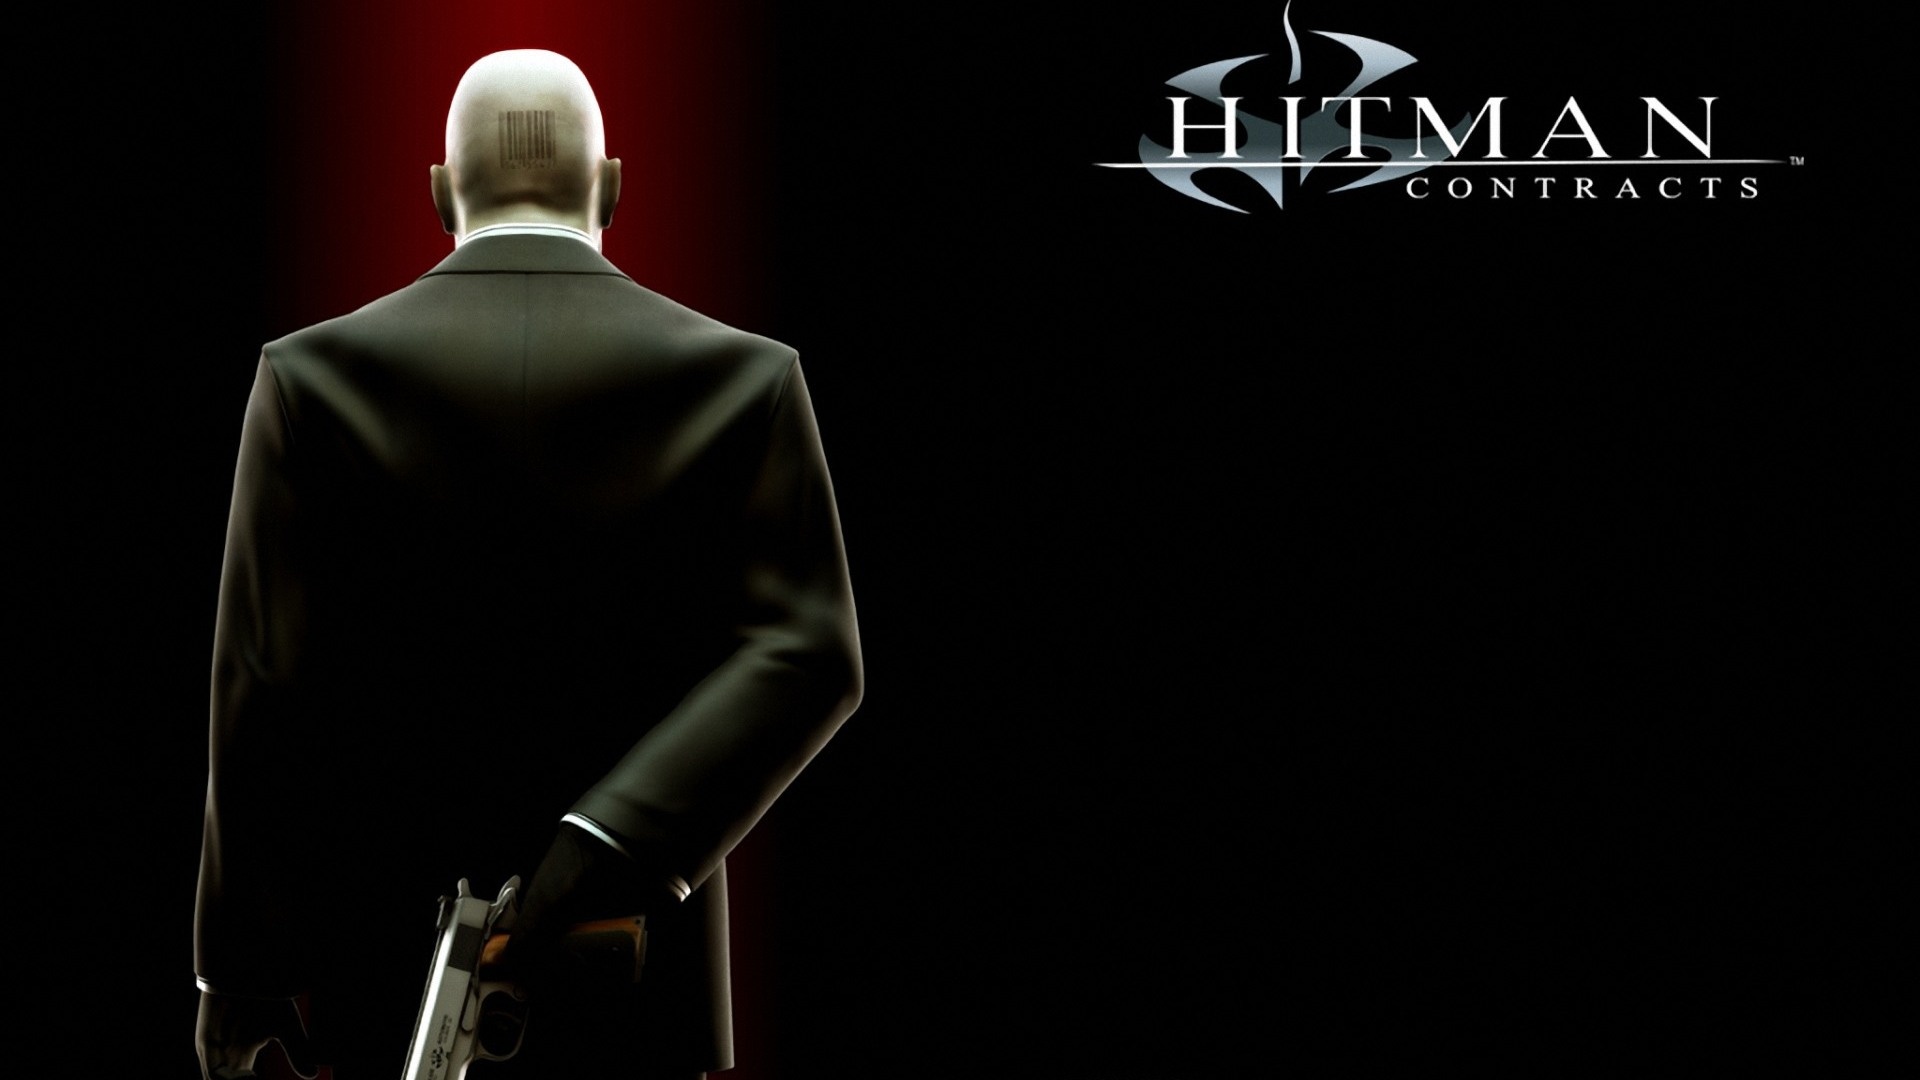 Hitman Contracts intrigue, Agent 47's world, Stealthy operations, Deadly assassinations, 1920x1080 Full HD Desktop